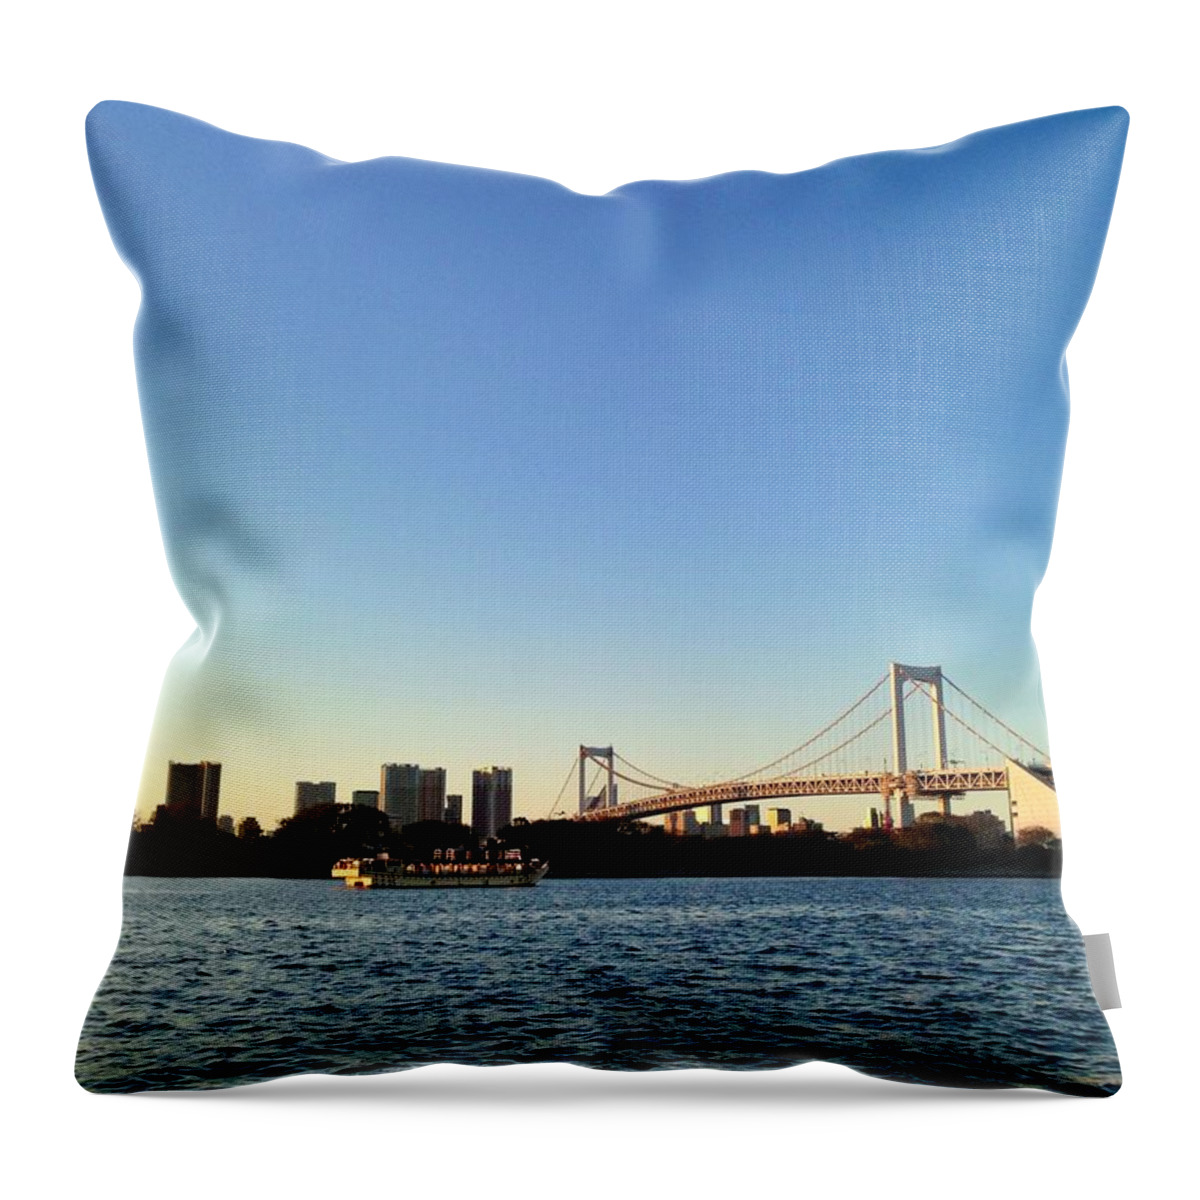 Tranquility Throw Pillow featuring the photograph Rainbow Bridge With Ferry by Hide